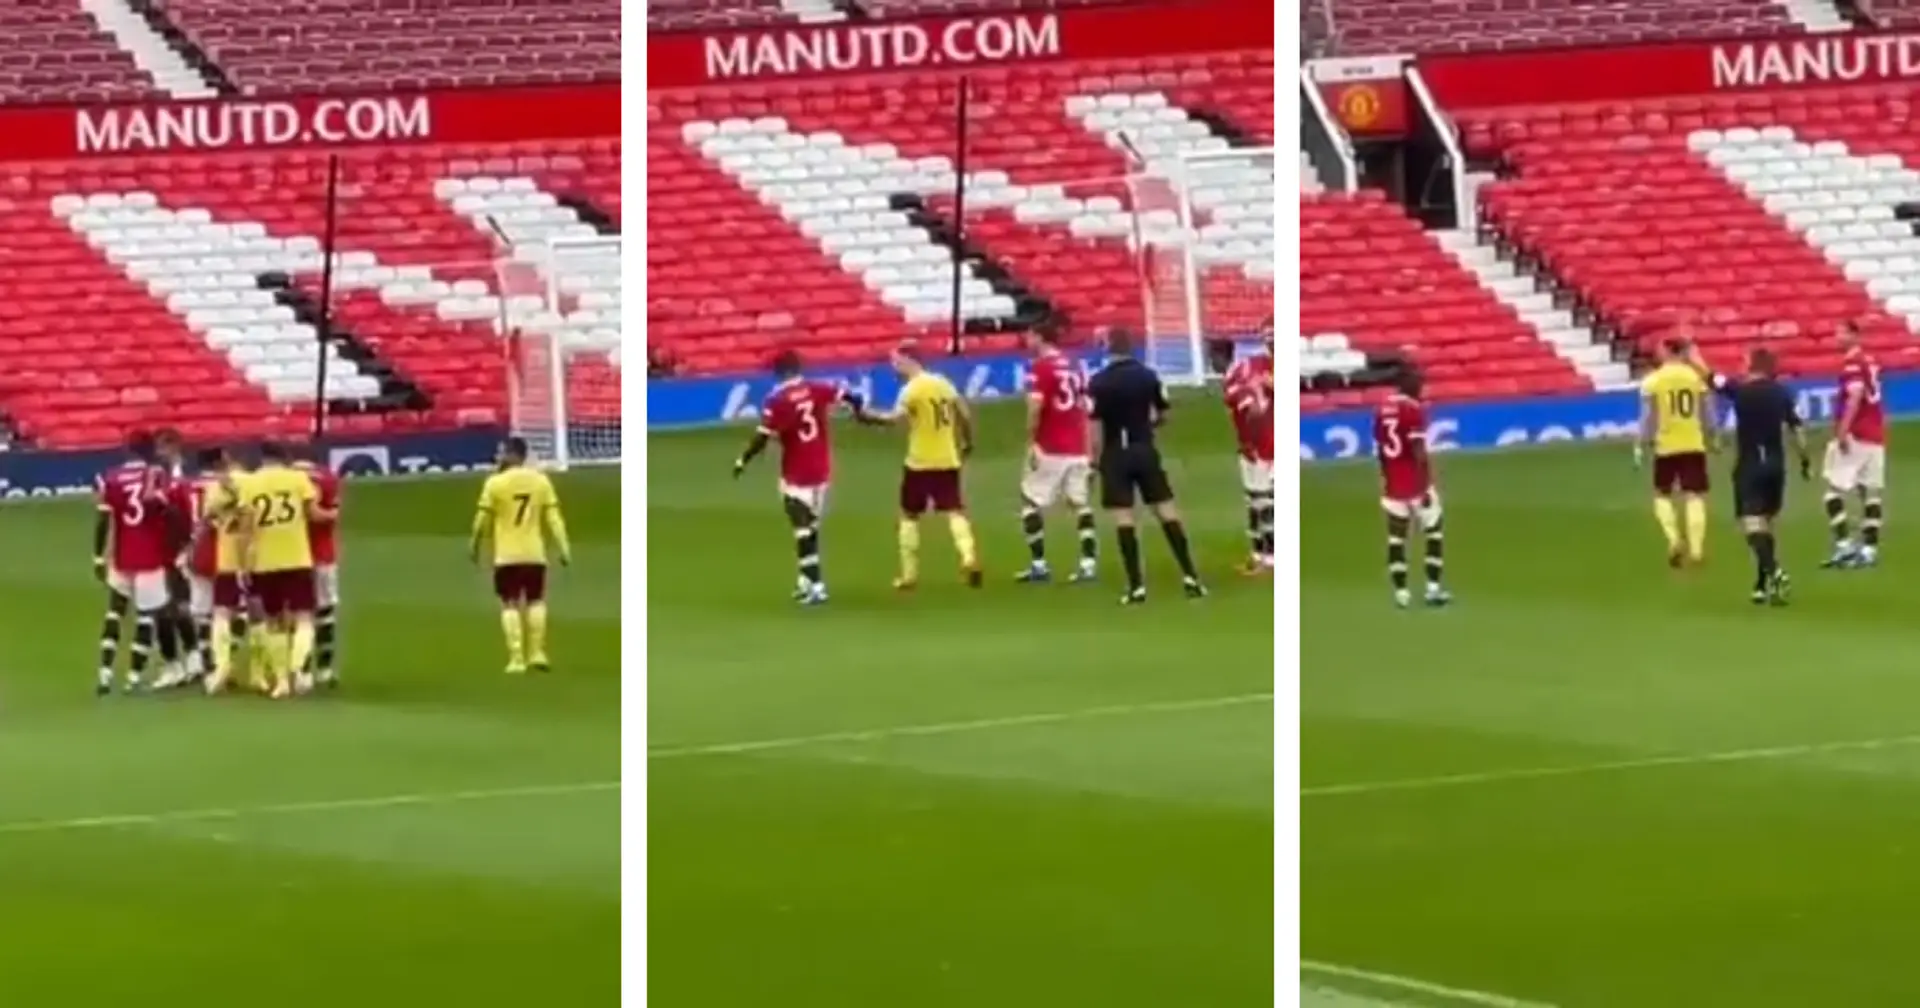 Eric Bailly returns to action in behind-closed-doors friendly, gets booked for penalty box scrap